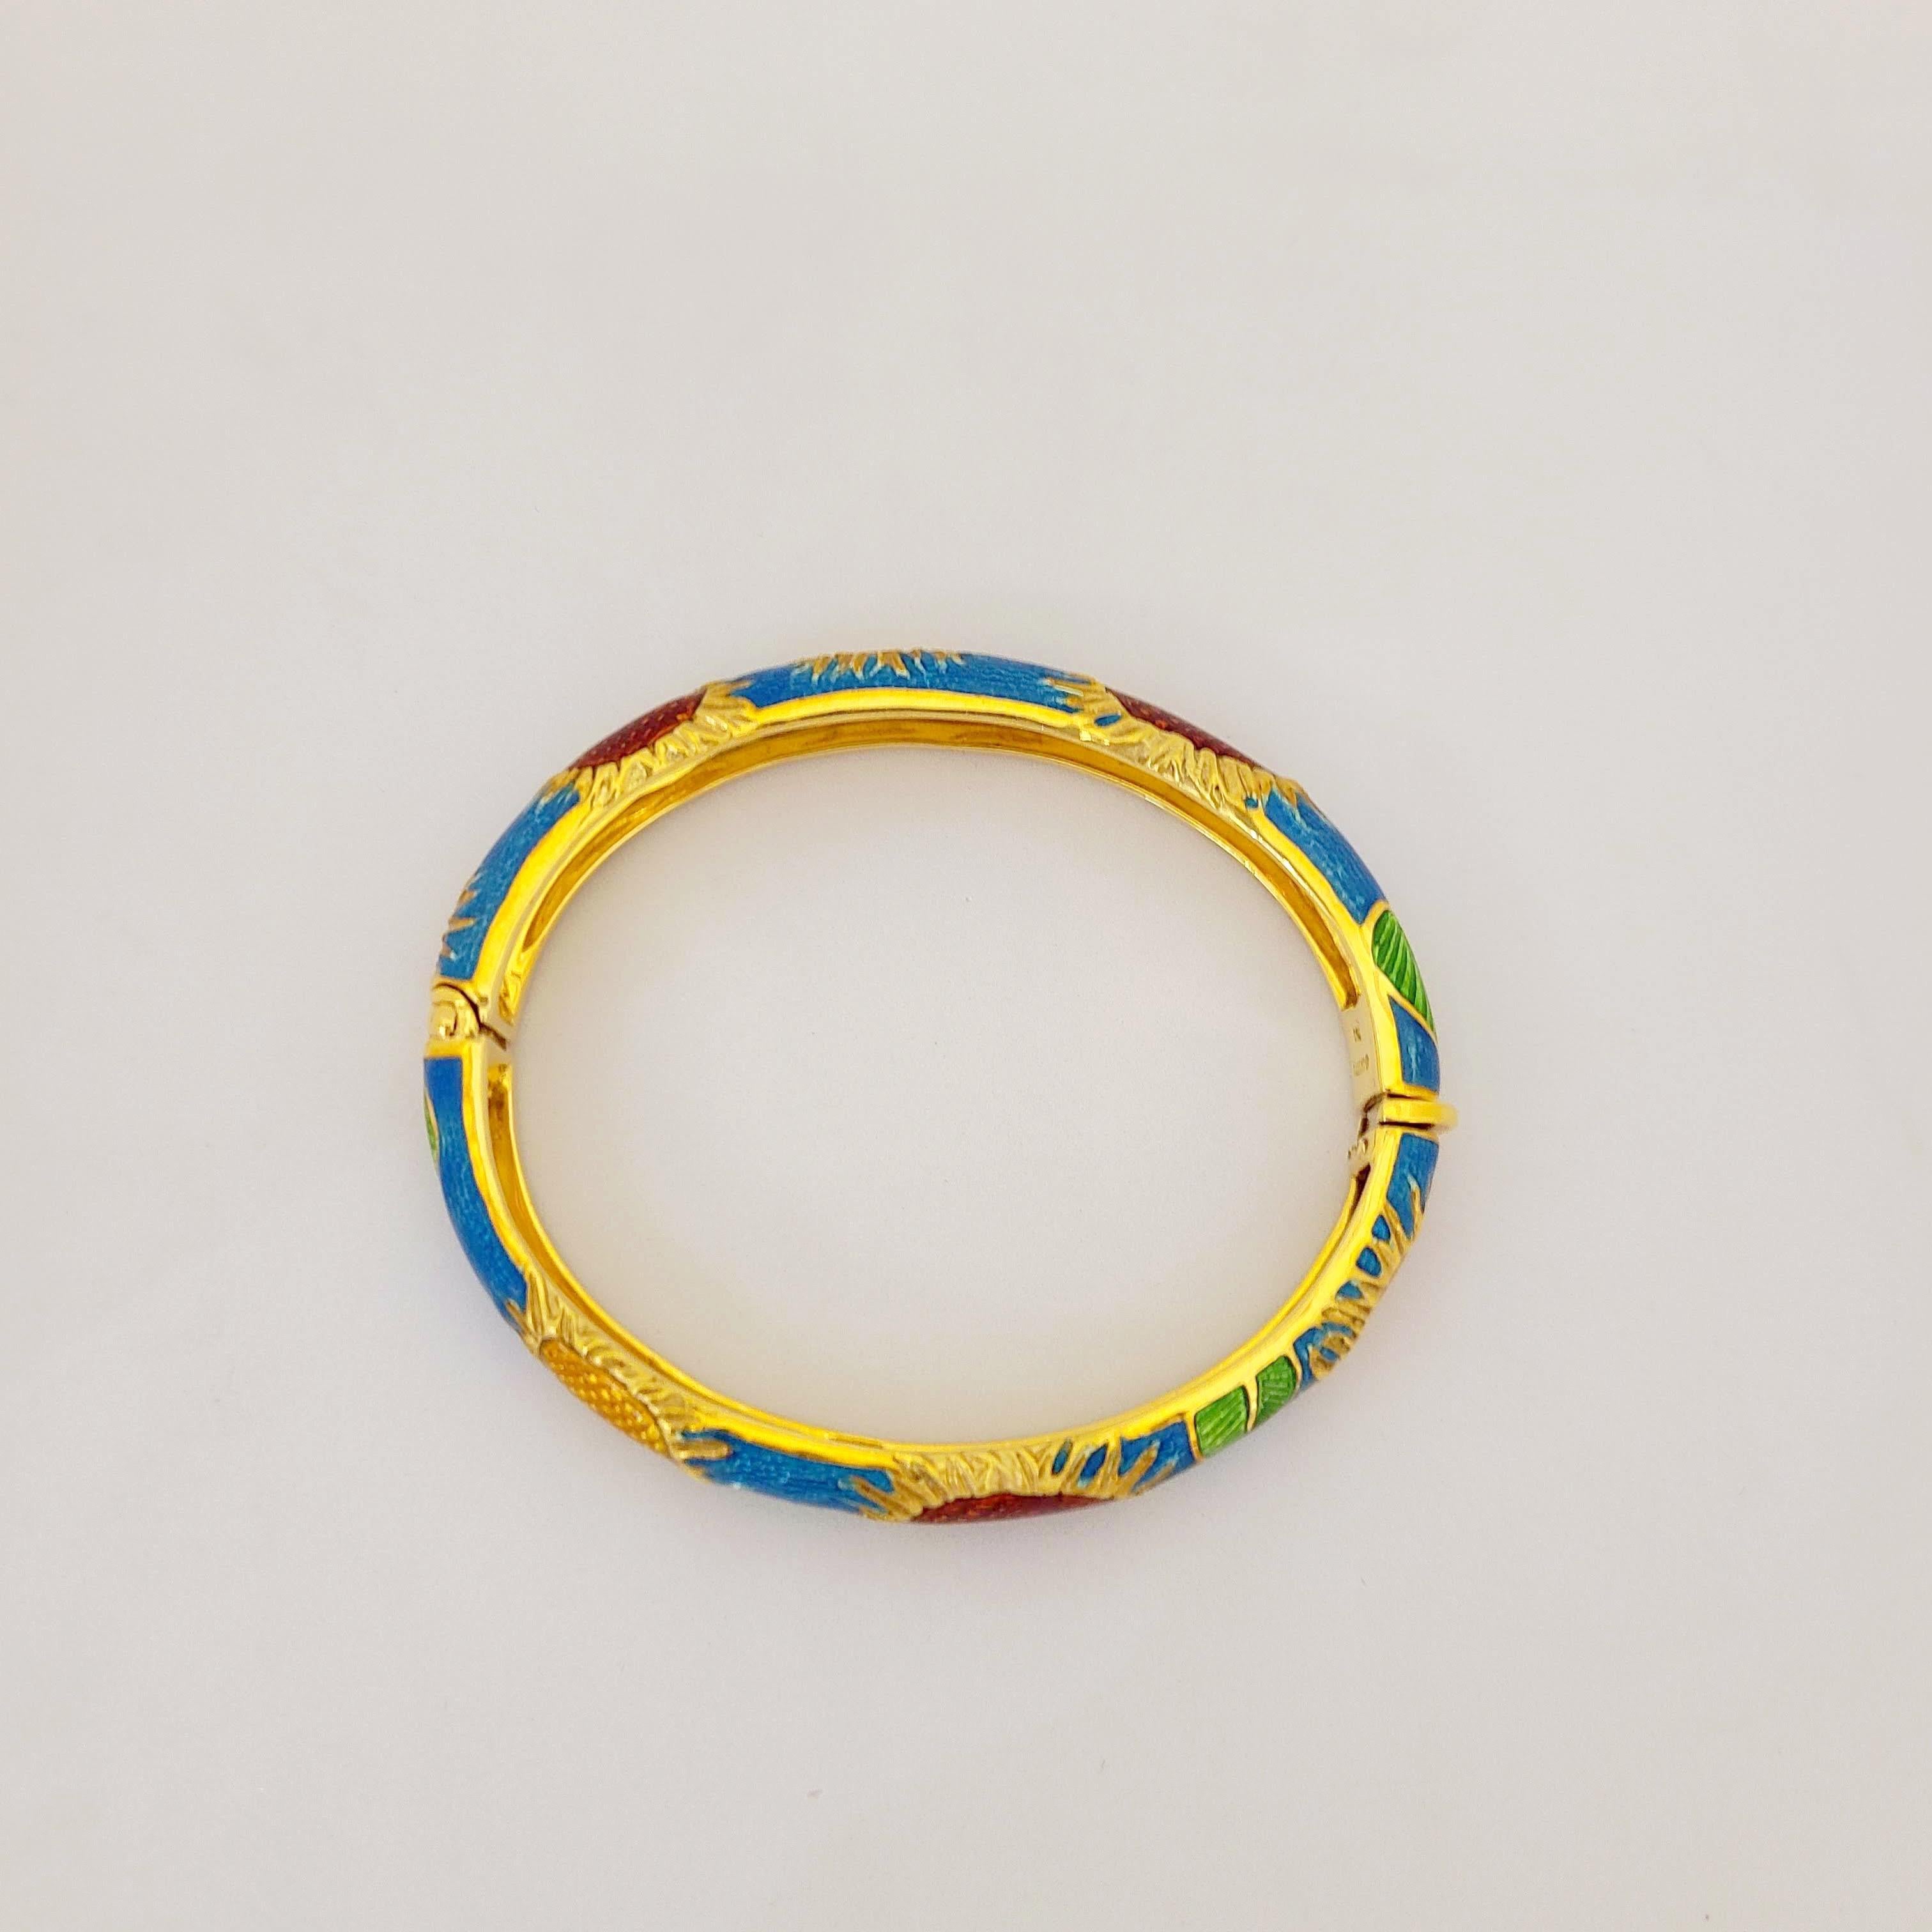 This 18 karat yellow gold oval shaped bracelet is enameled in a medium vibrant blue. Red and yellow enamel sunflowers with green leaves are the overall design. The inside measurement of the bangle is 56.5mm x 47.5 mm ...2.5